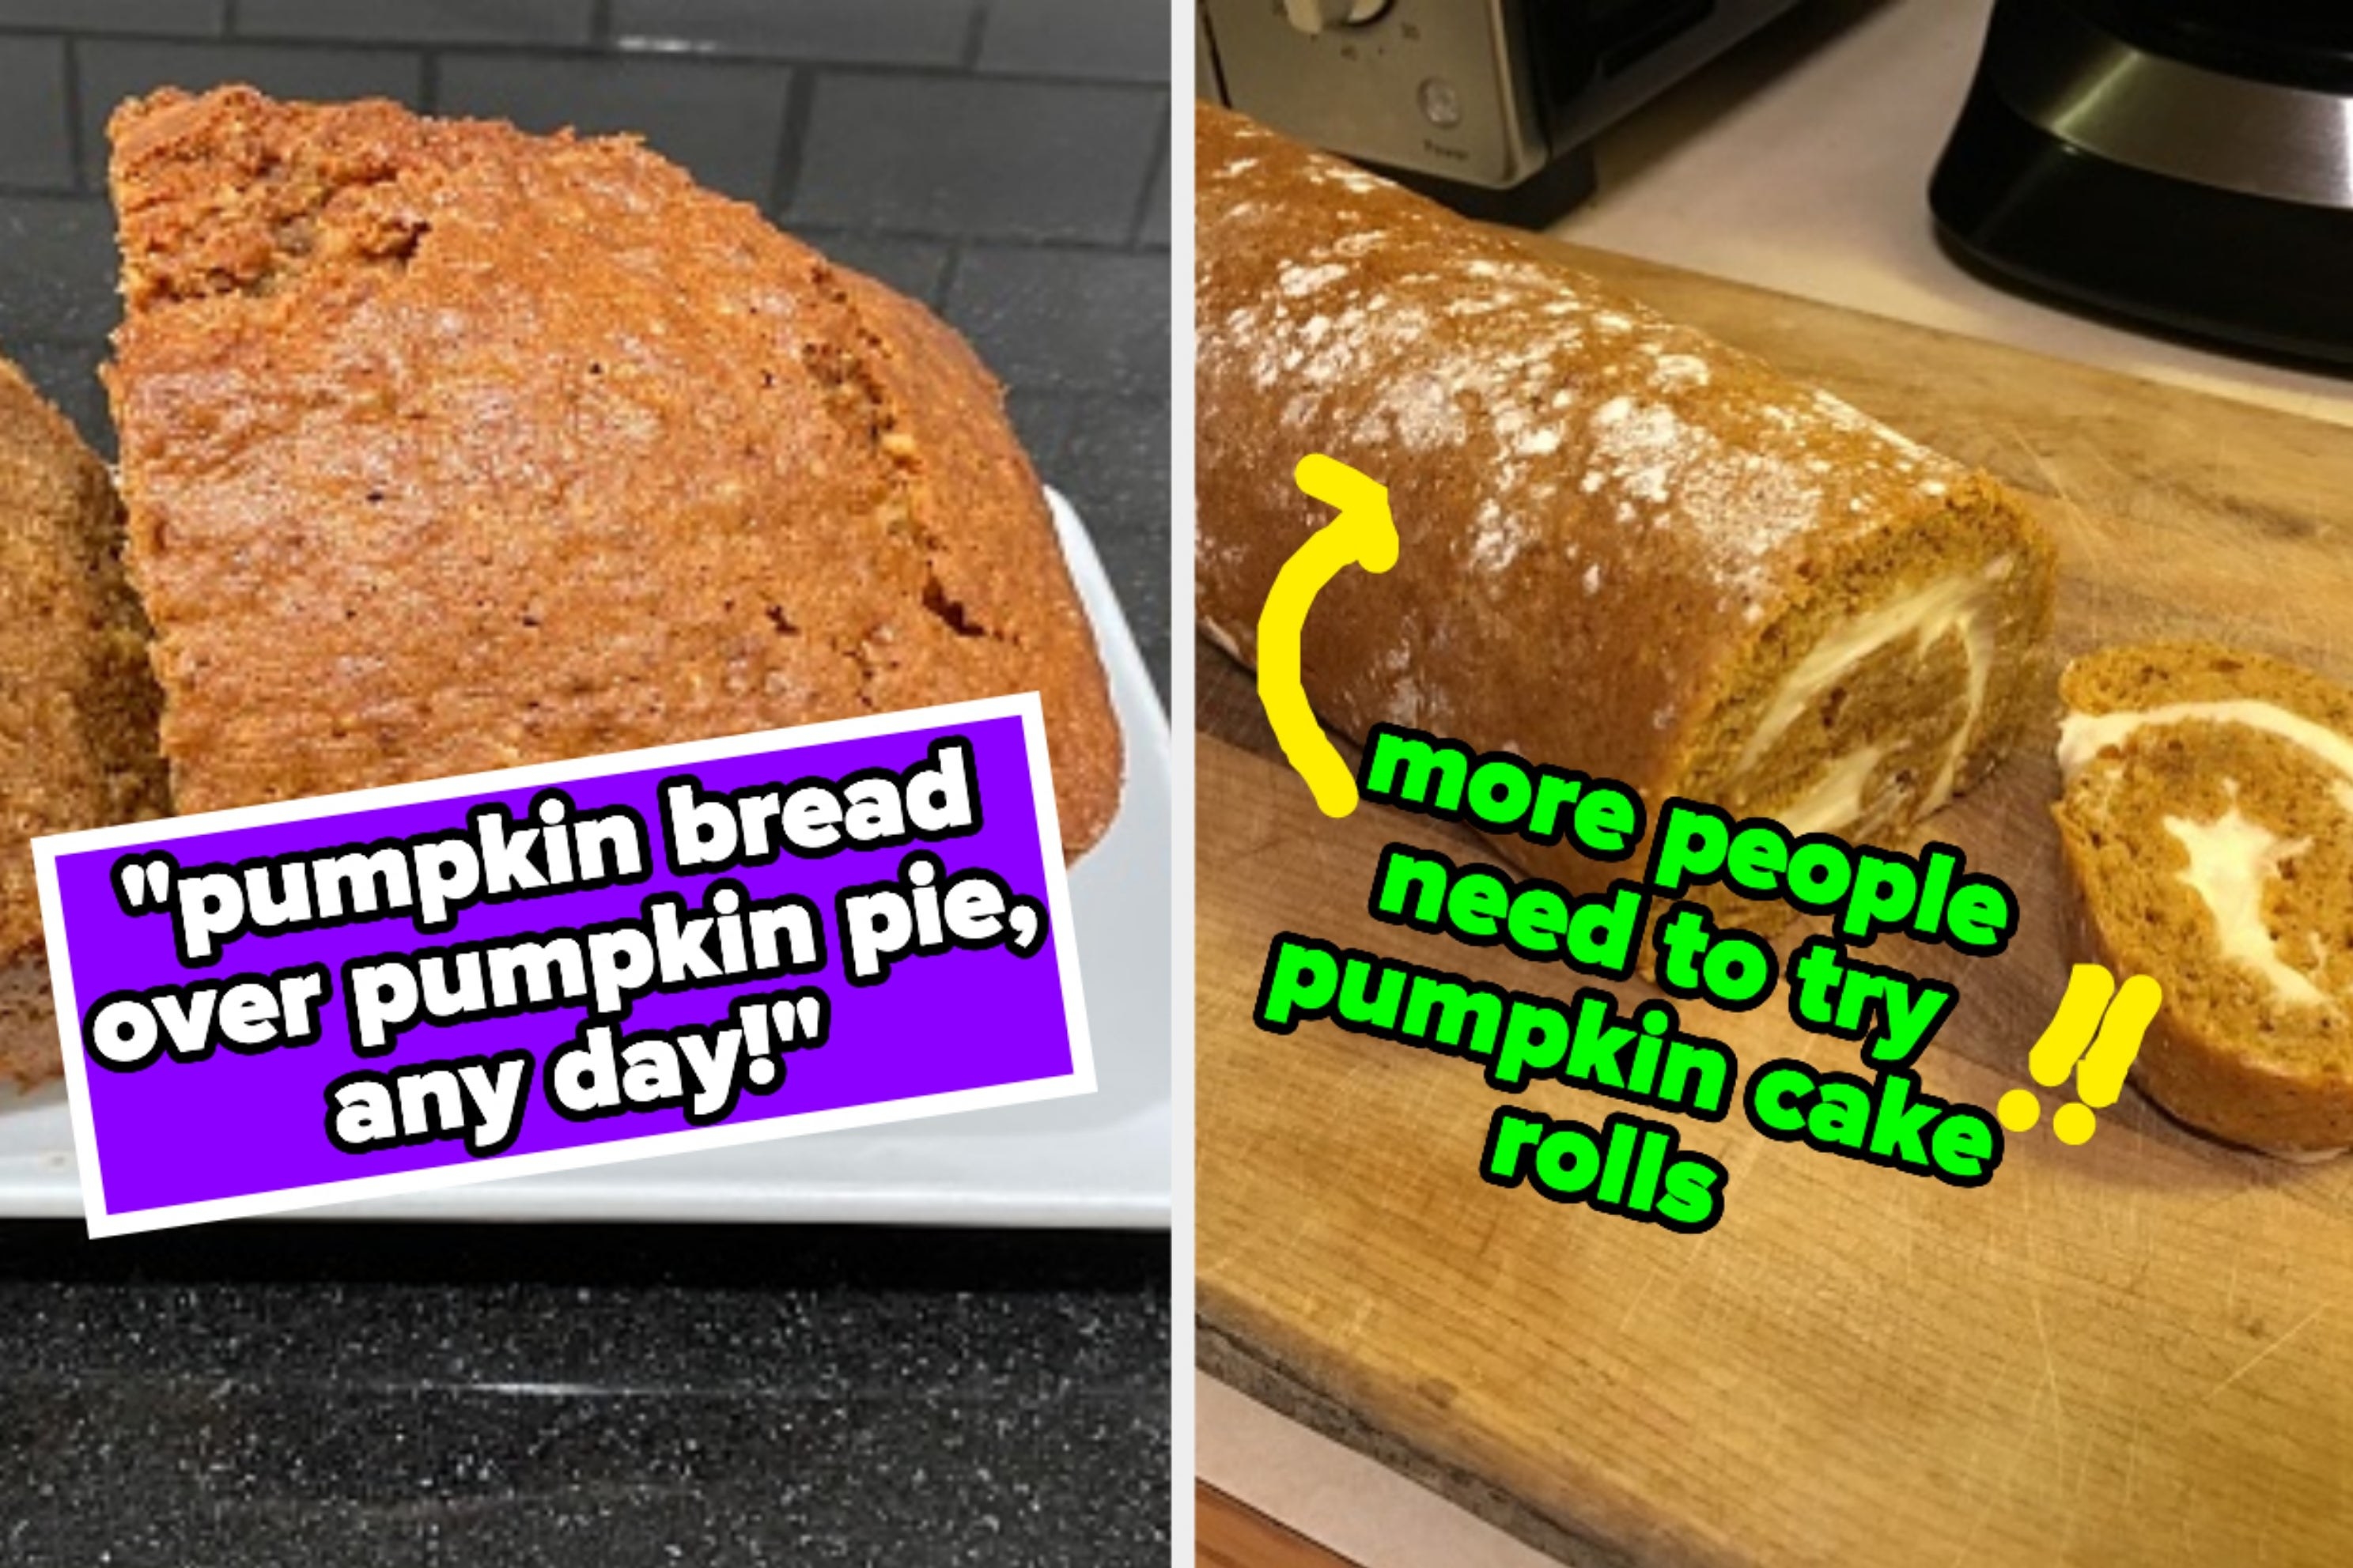 On the left, some pumpkin bread labeled &quot;pumpkin brad over pumpkin pie, any day!&quot; and on the right, a pumpkin roll labeled &quot;more people need to try pumpkin cake rolls&quot;